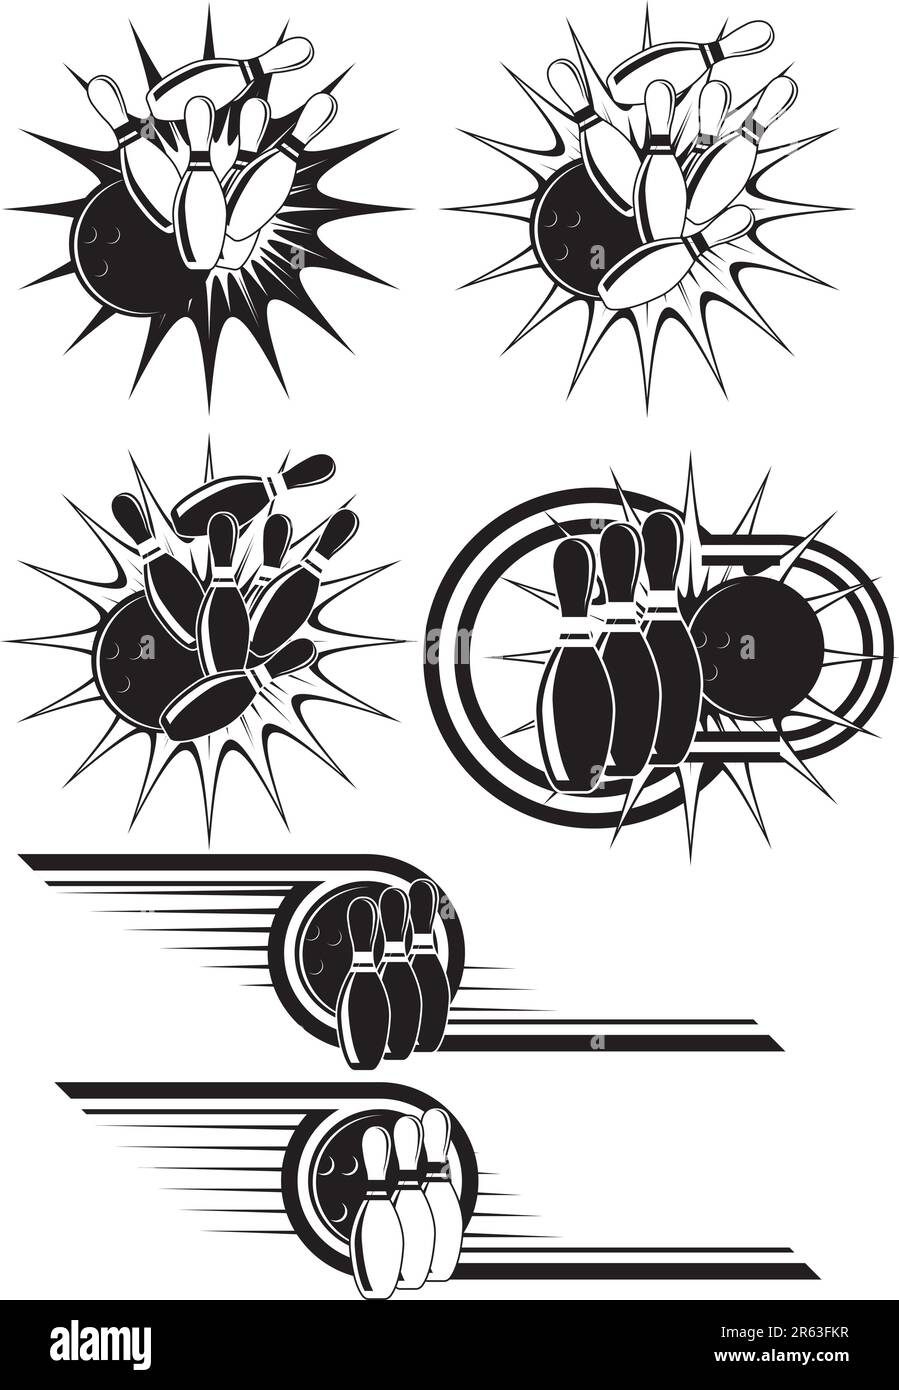 Black And White Bowling clipart styled as emblems Stock Vector